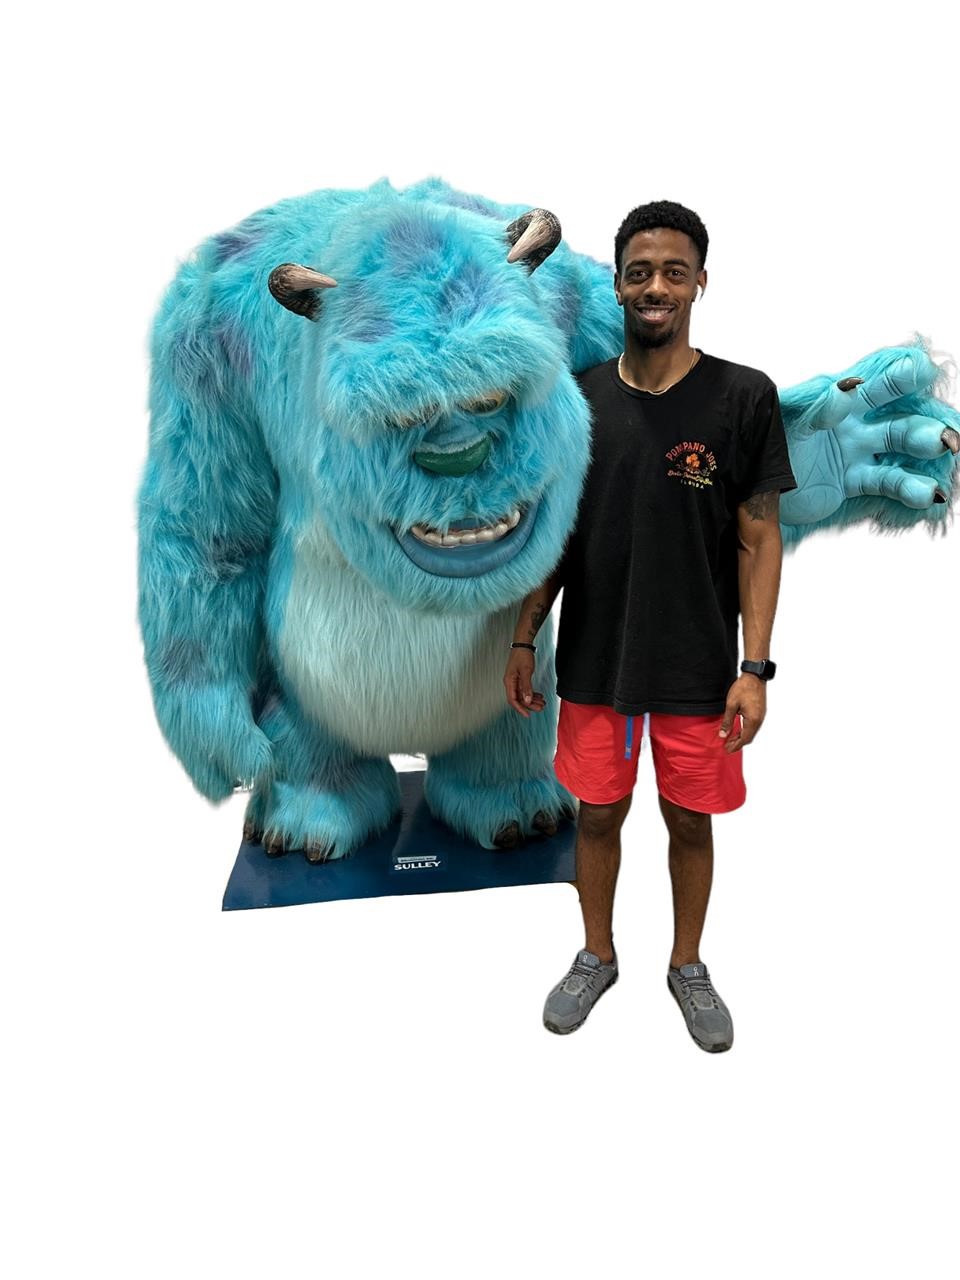 Life Size Sully Disney Statue